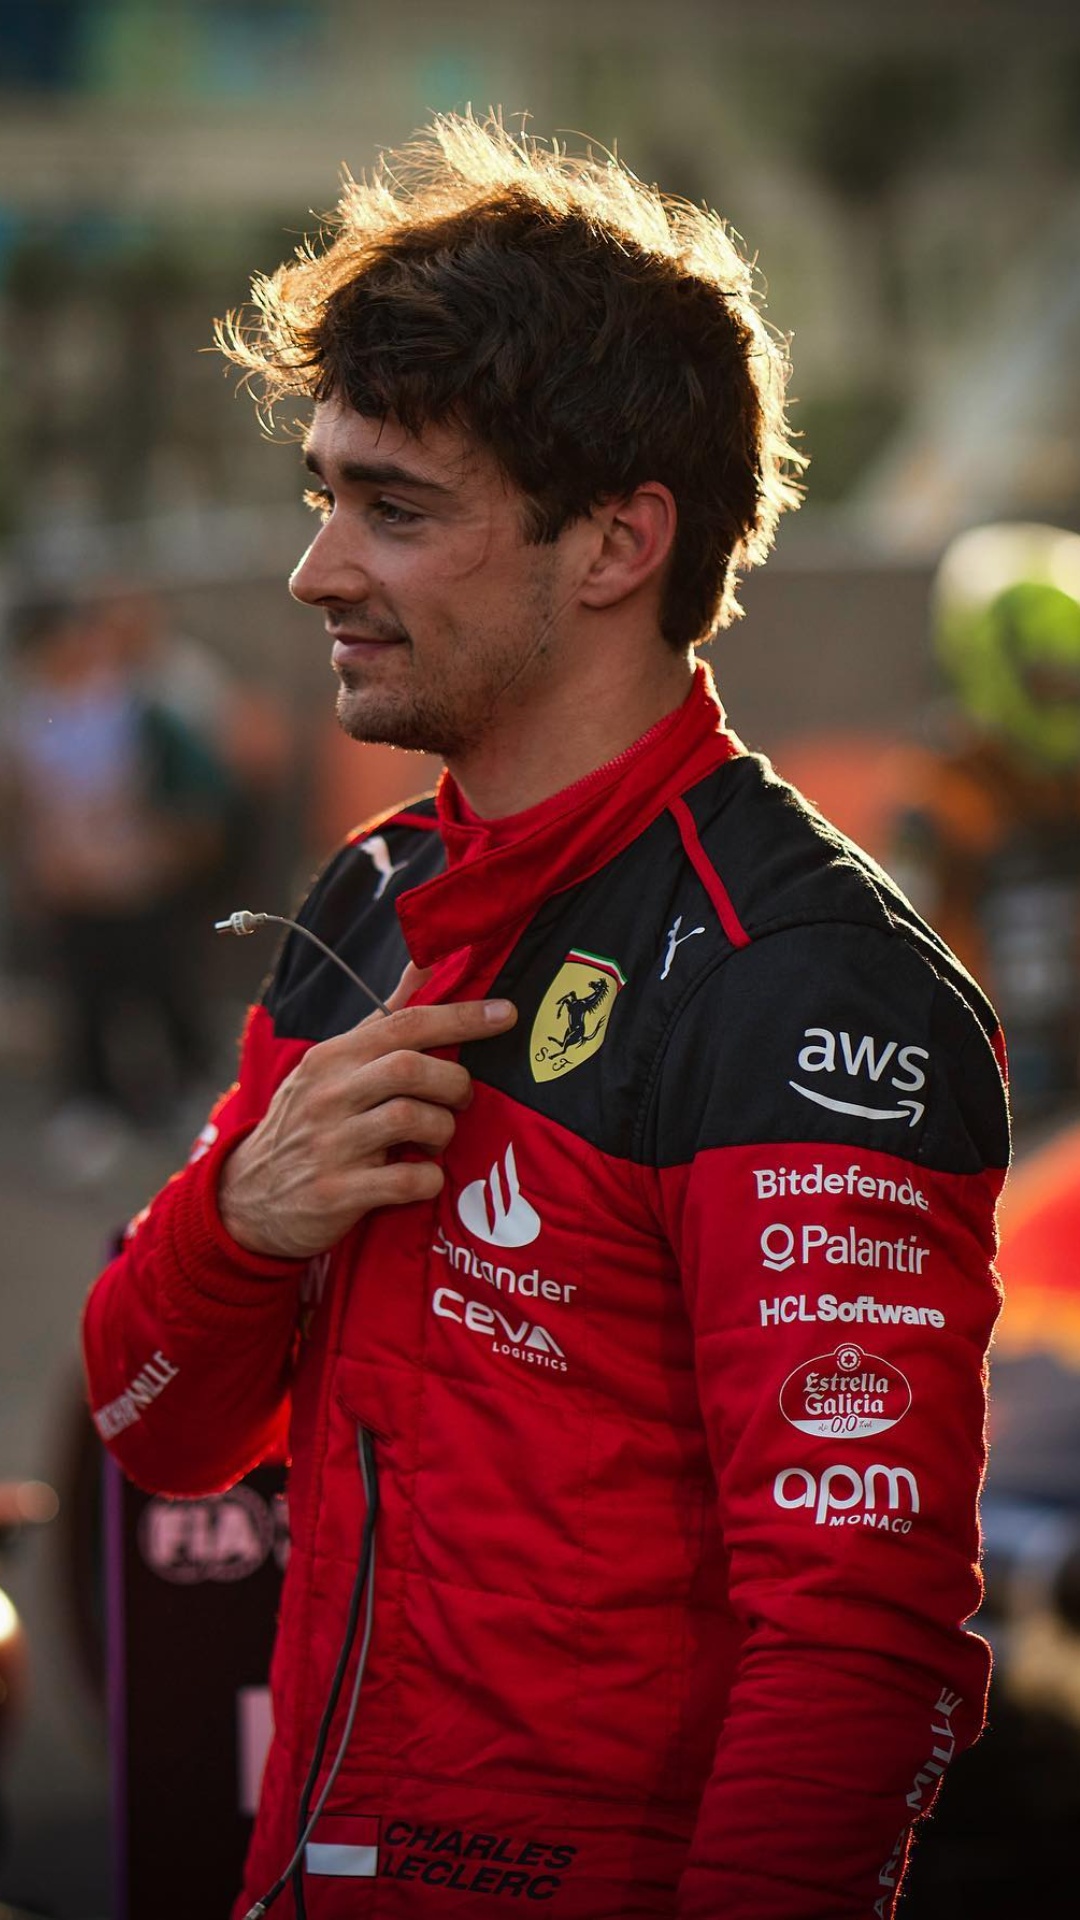 Charles Leclerc Wallpaper 4k For iPhone